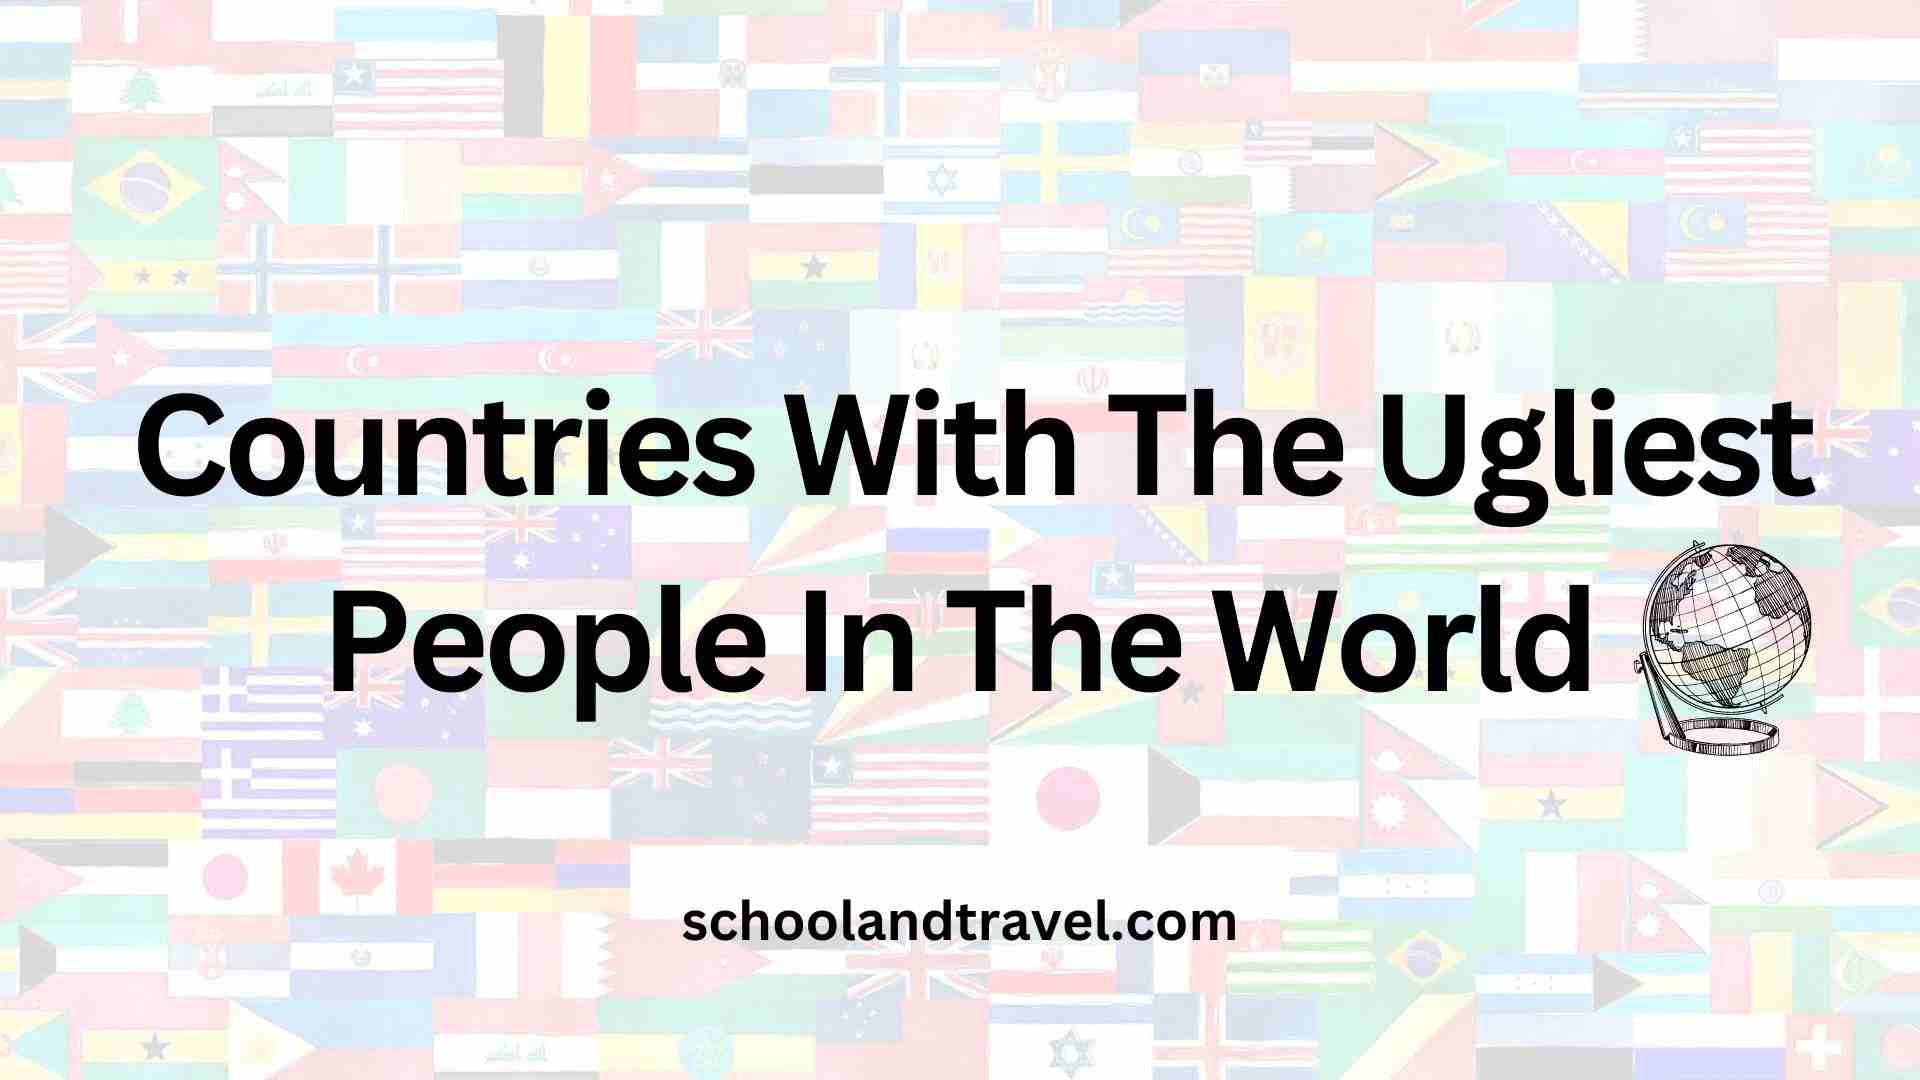 Countries With The Ugliest People In The World